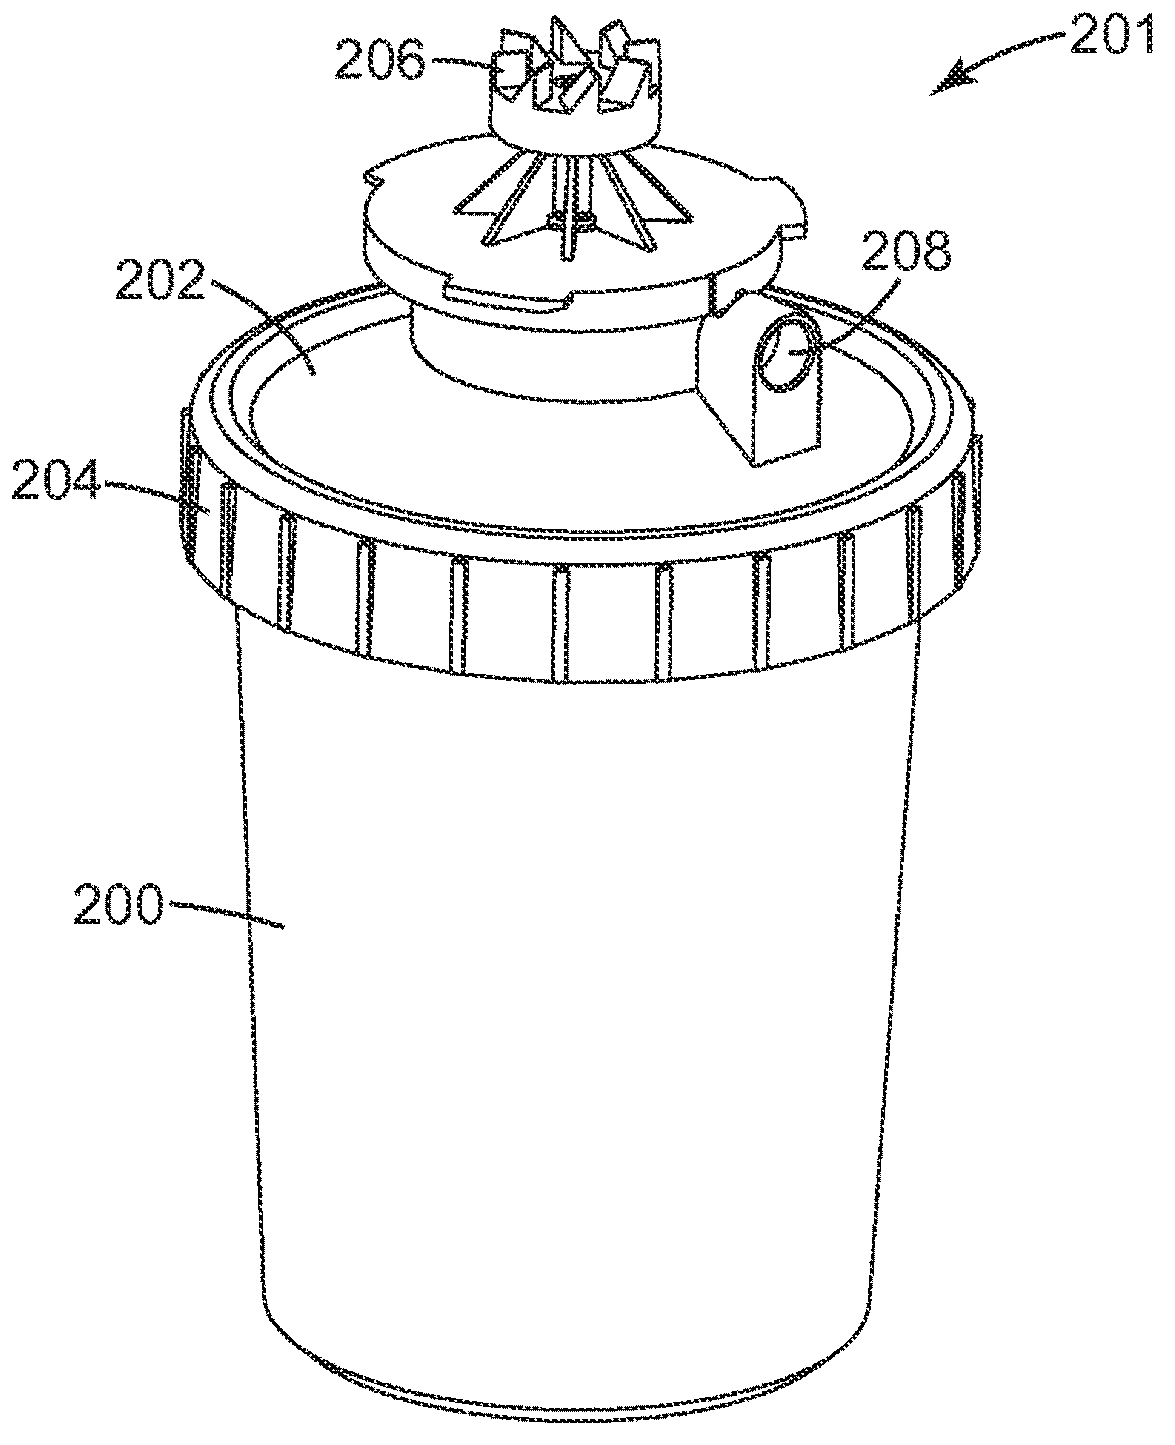 Dispensing liquids from a container coupled to an integrated pump cap